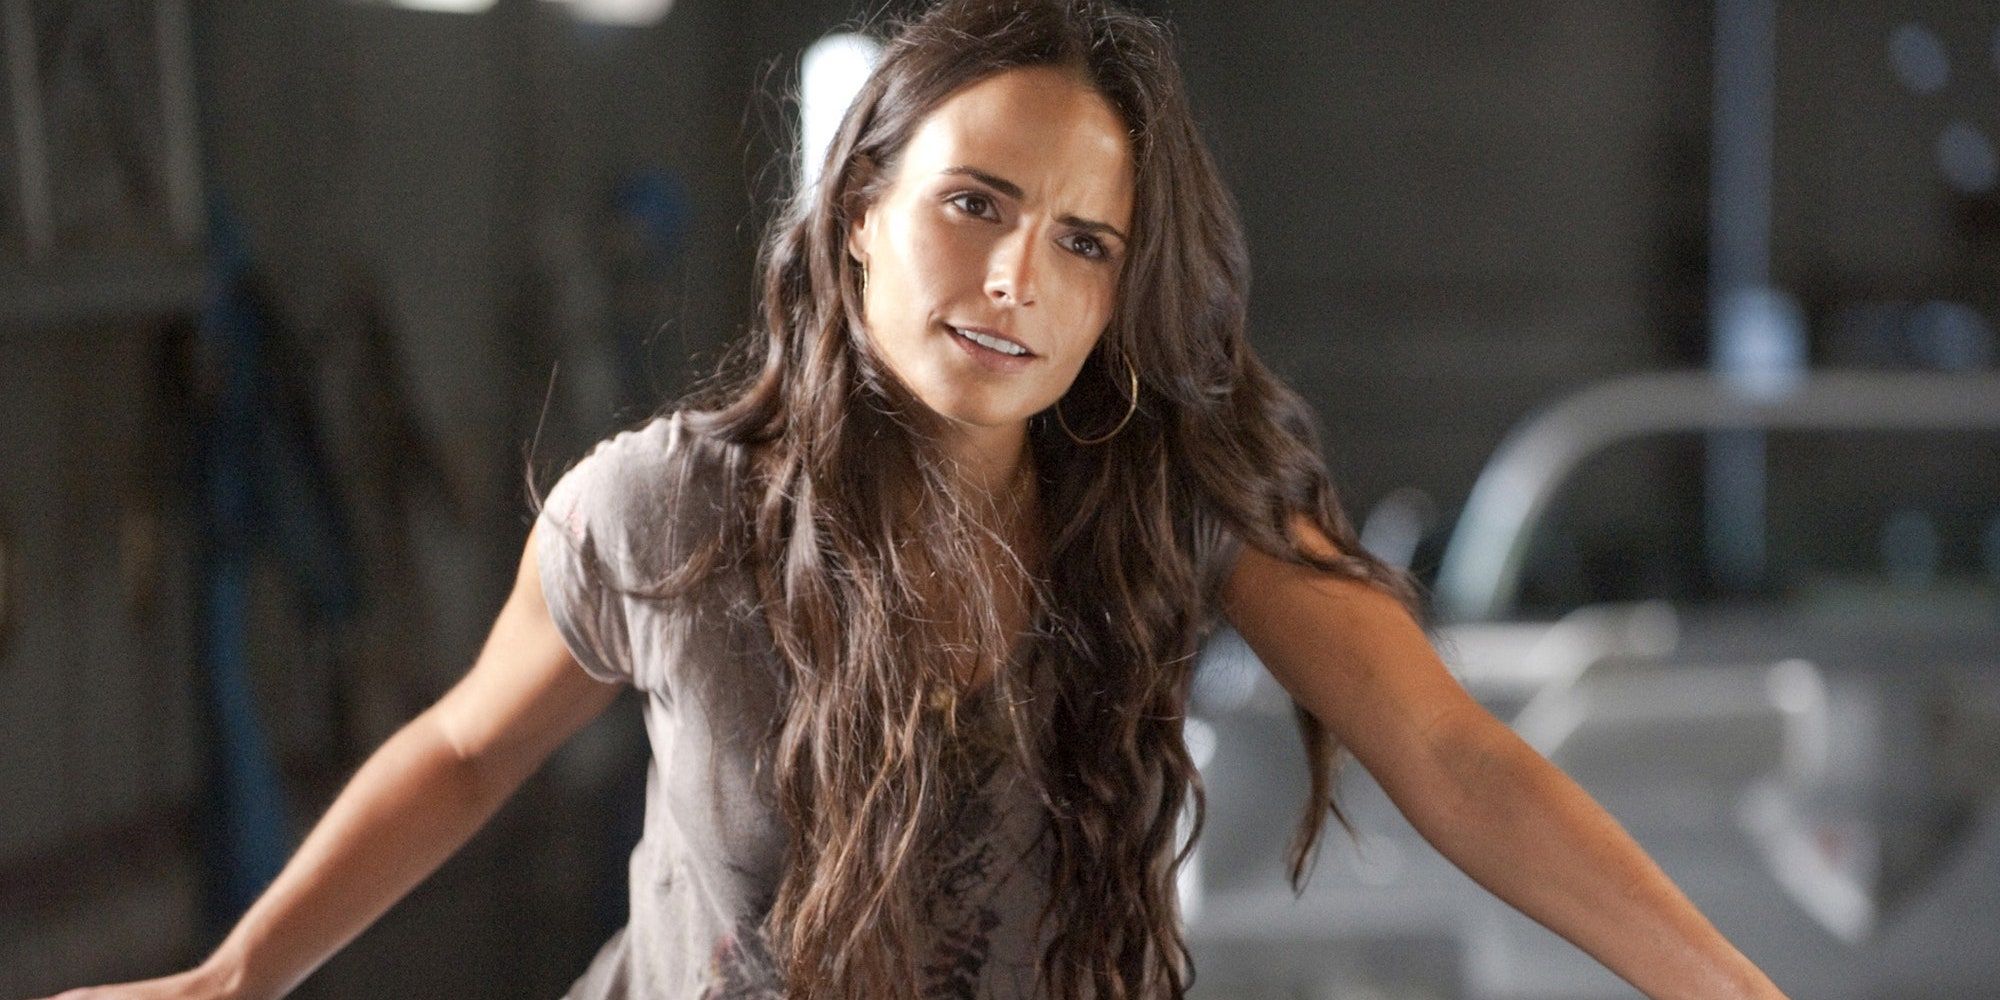 Mia Toretto (Jordana Brewster) with furrowed brow in The Fast and the Furious.